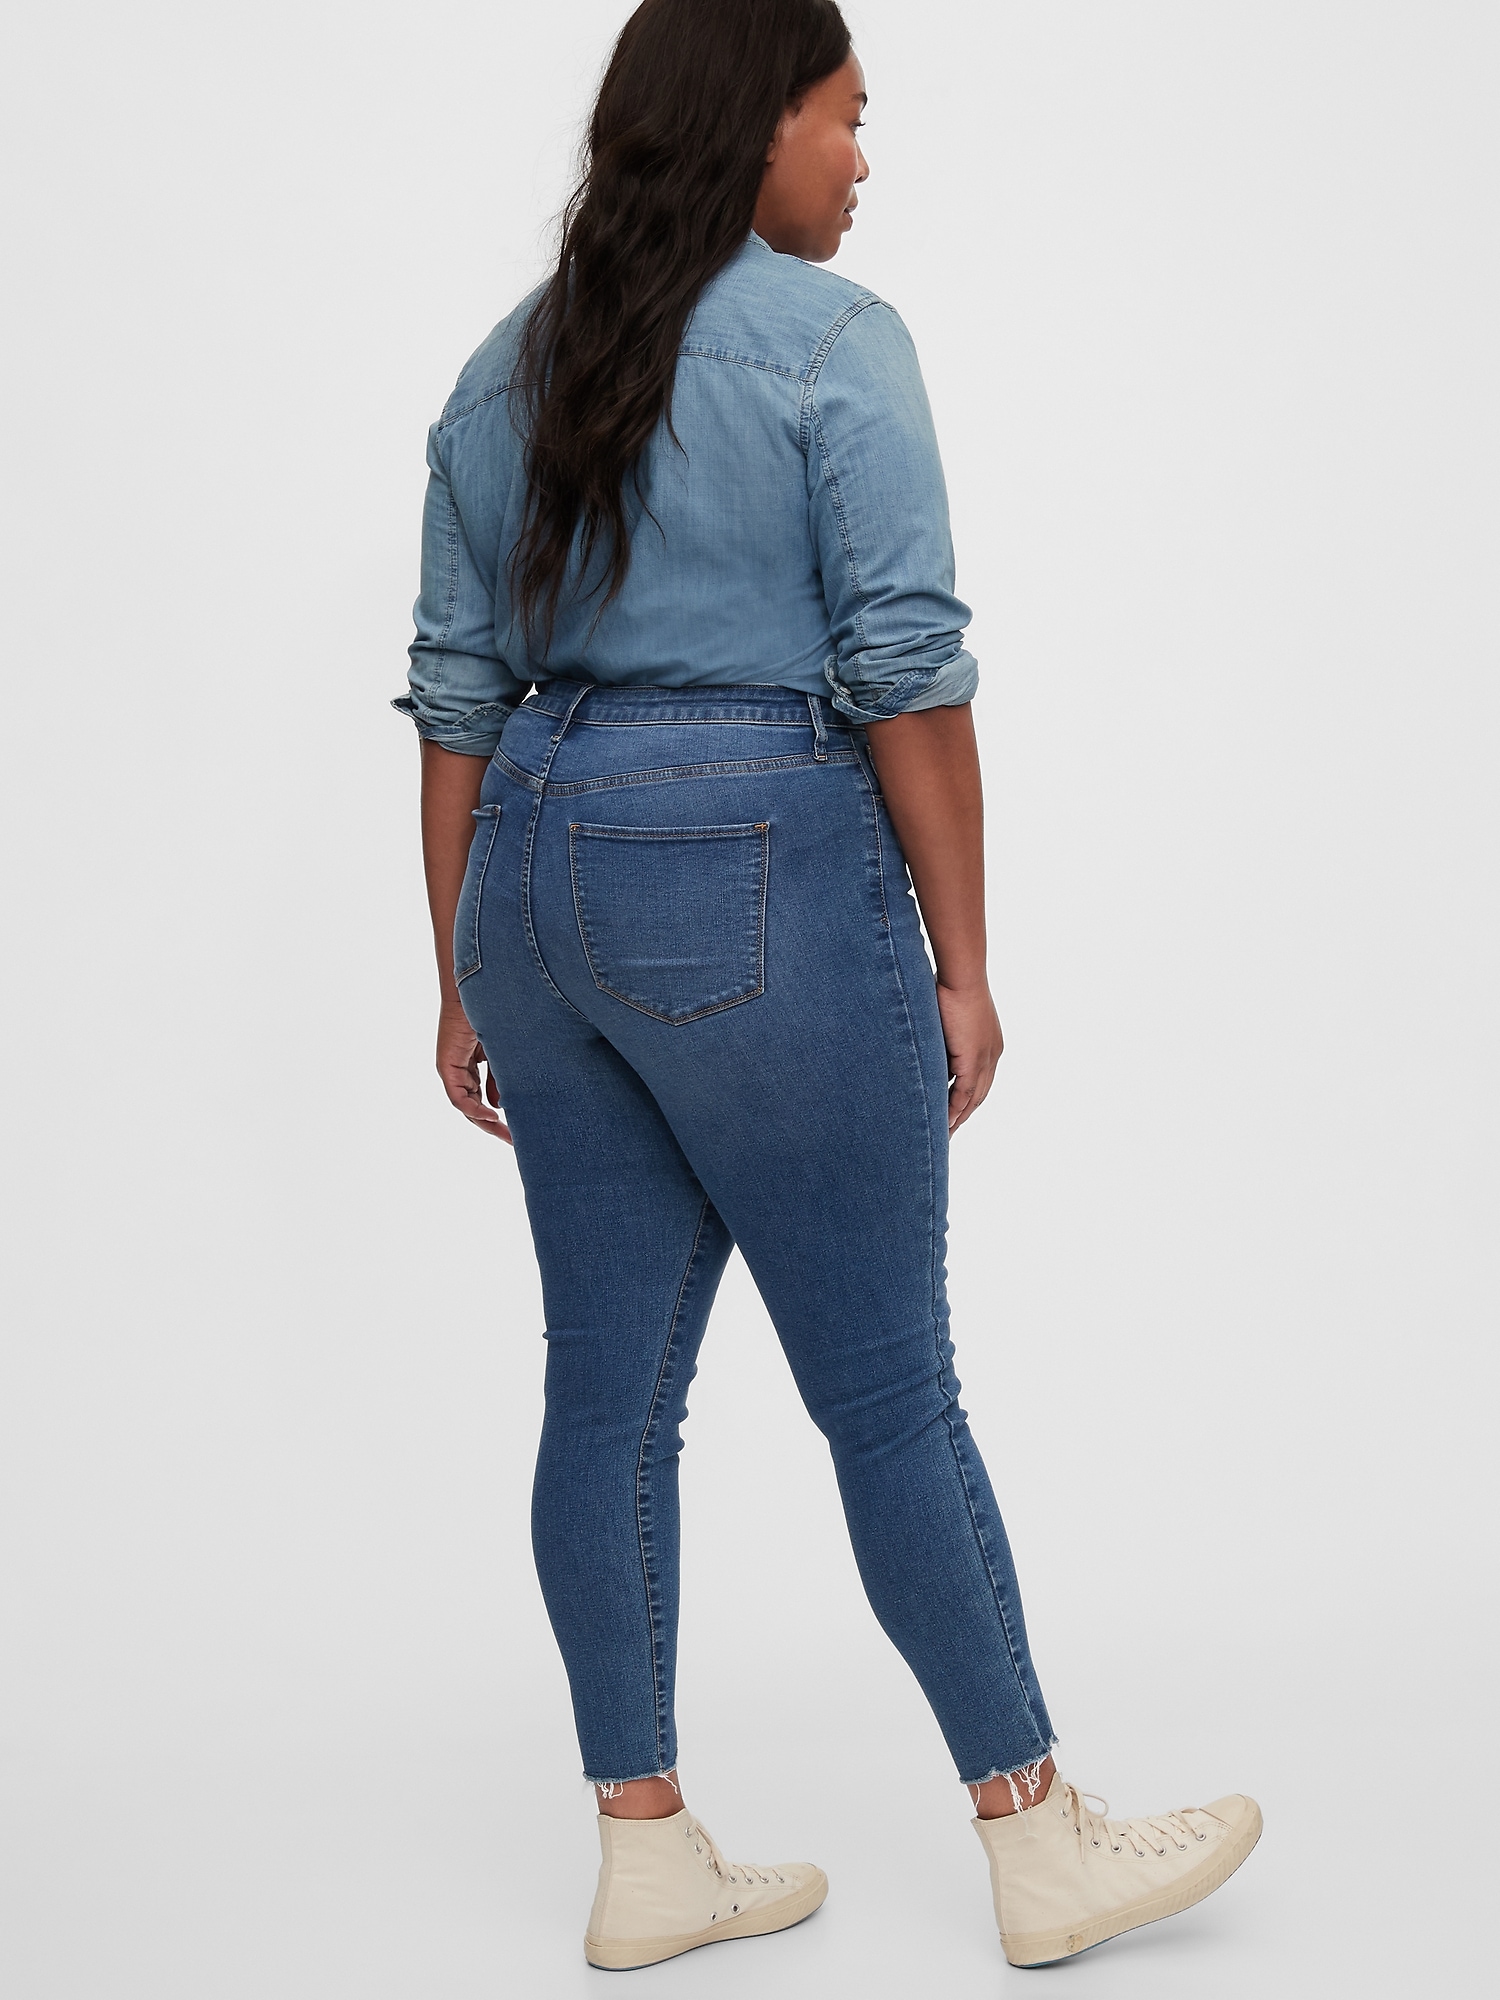 Buy Gap High Waisted Universal Jegging from the Gap online shop